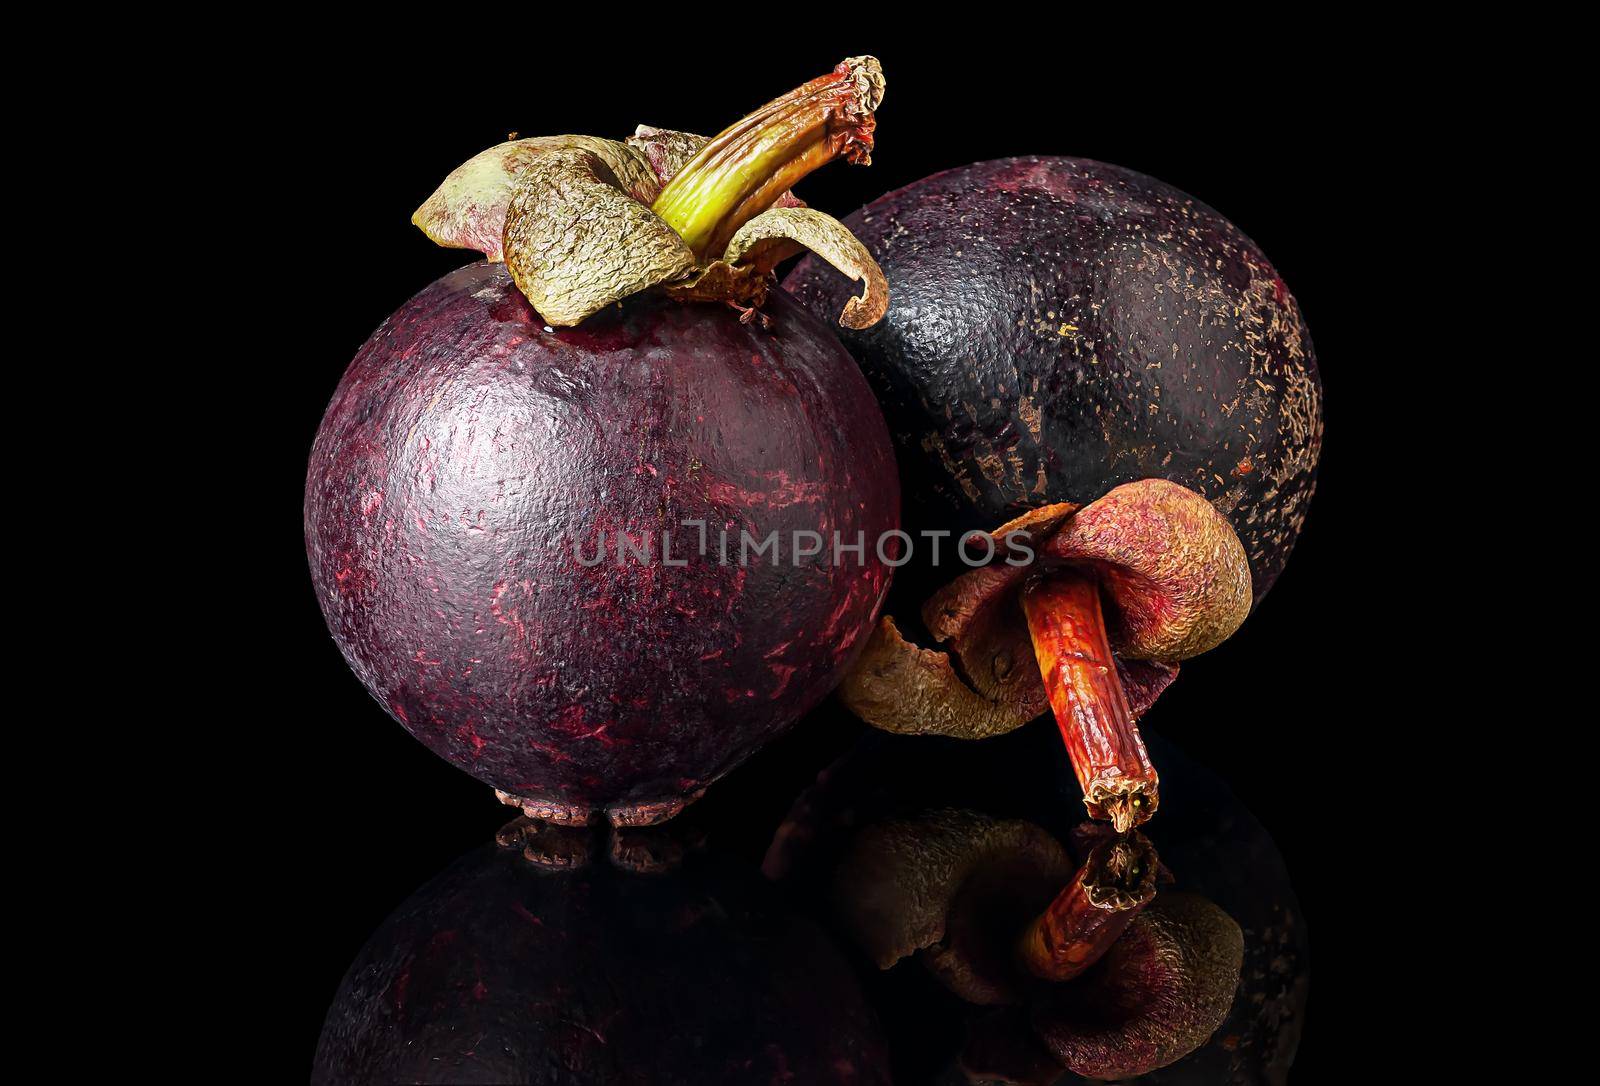 Two ripe mangosteen one after another on a black background